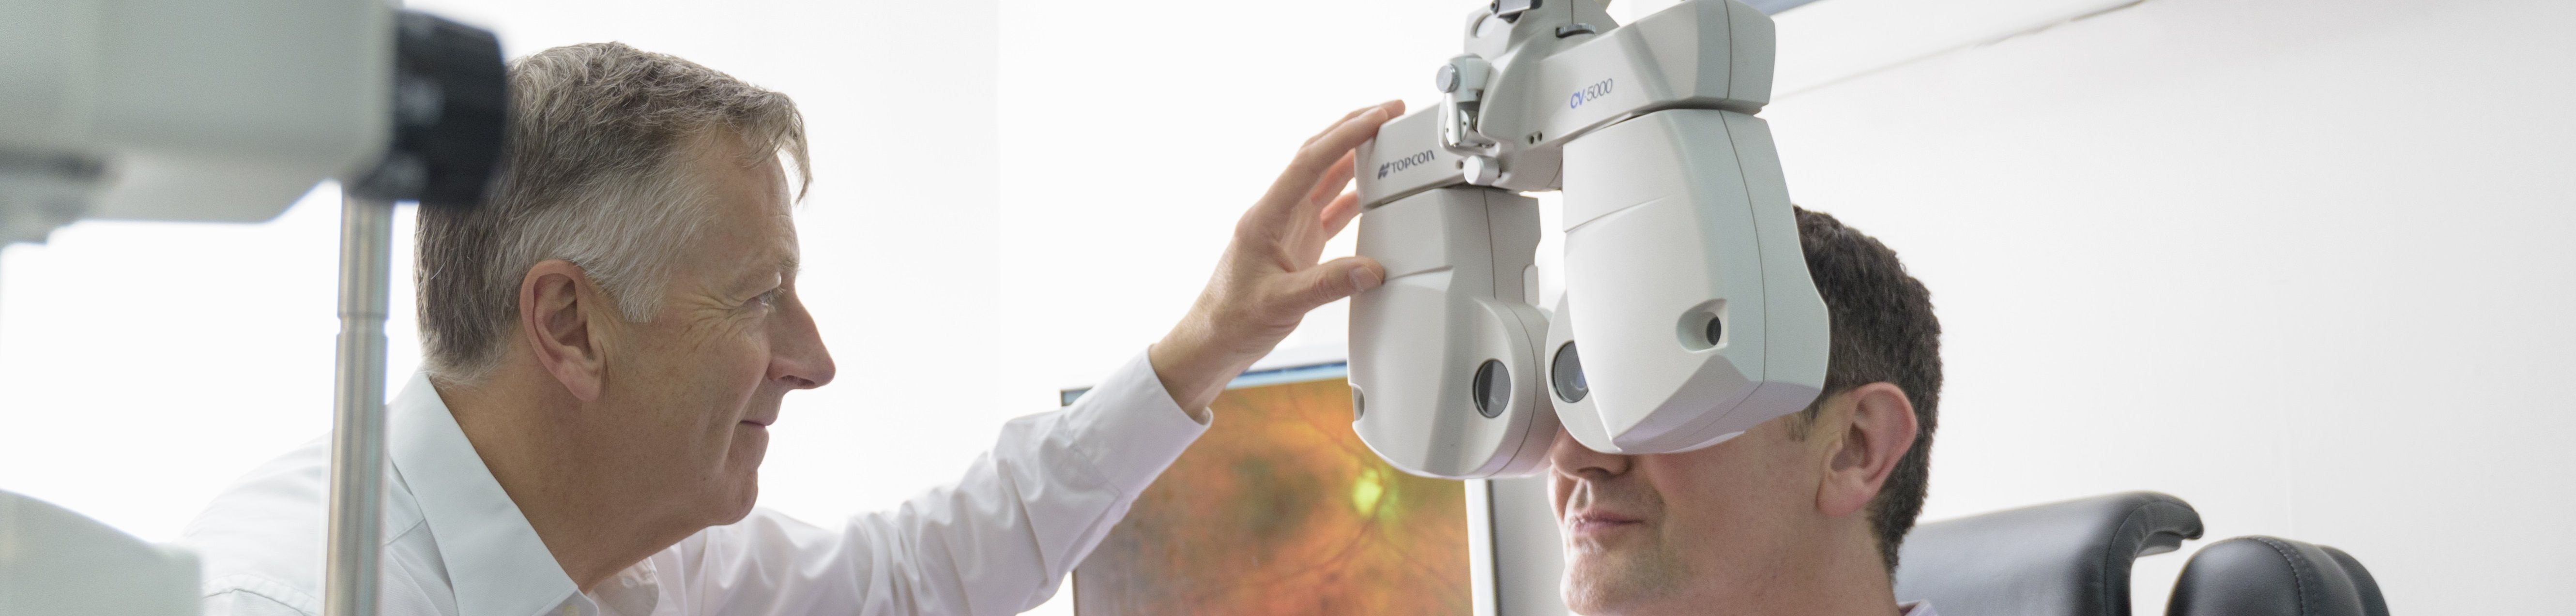 What to expect in an eye exam